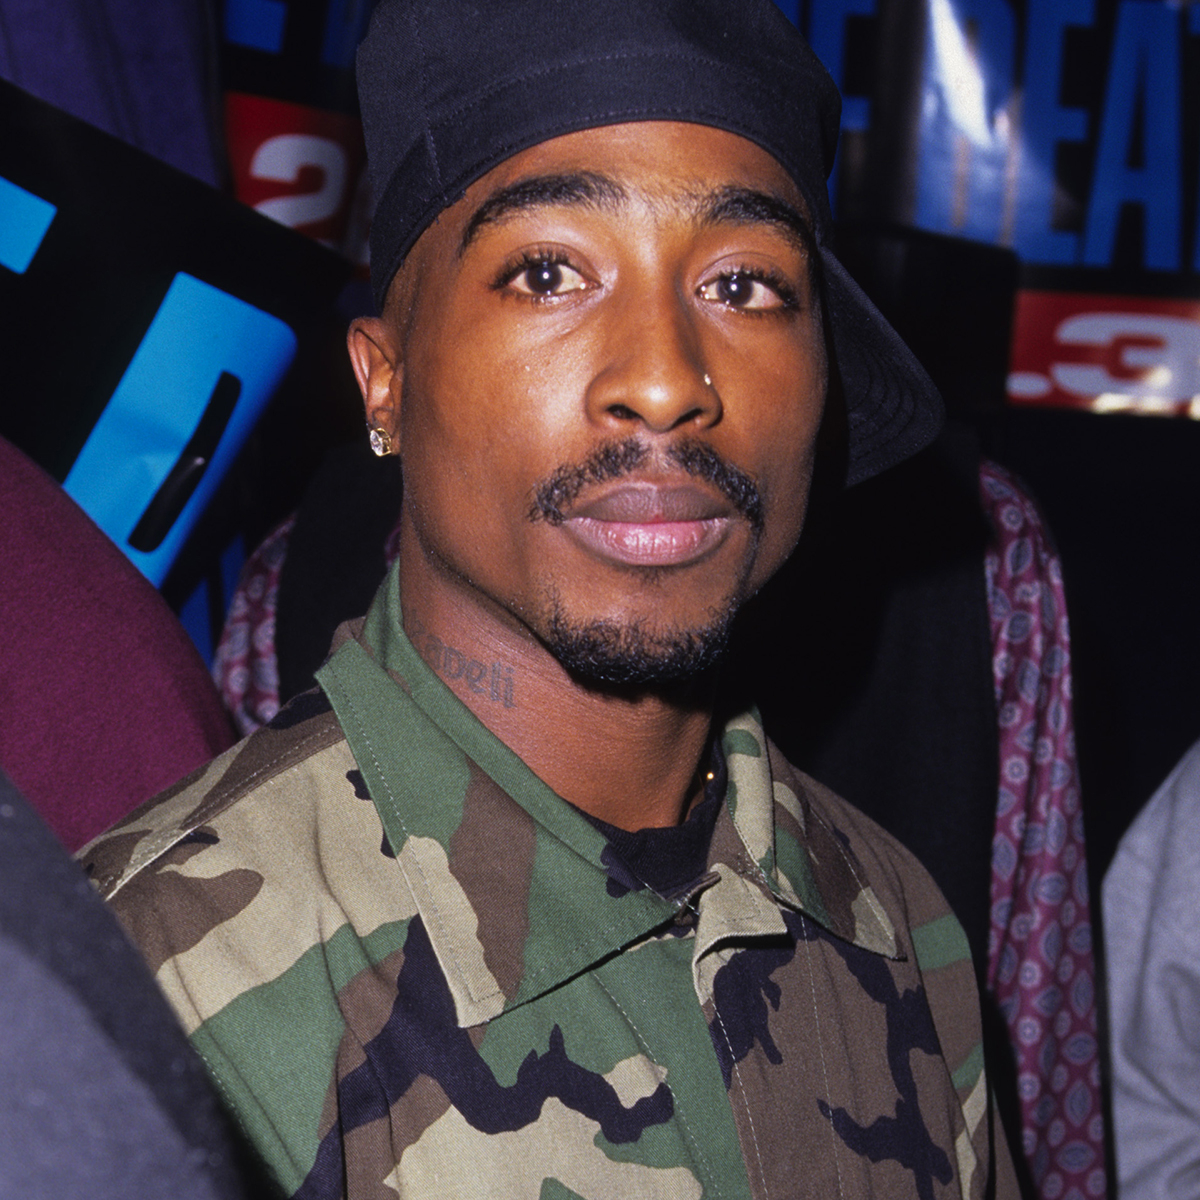 Police Share New Update on Tupac Shakur’s Unsolved 1996 Murder